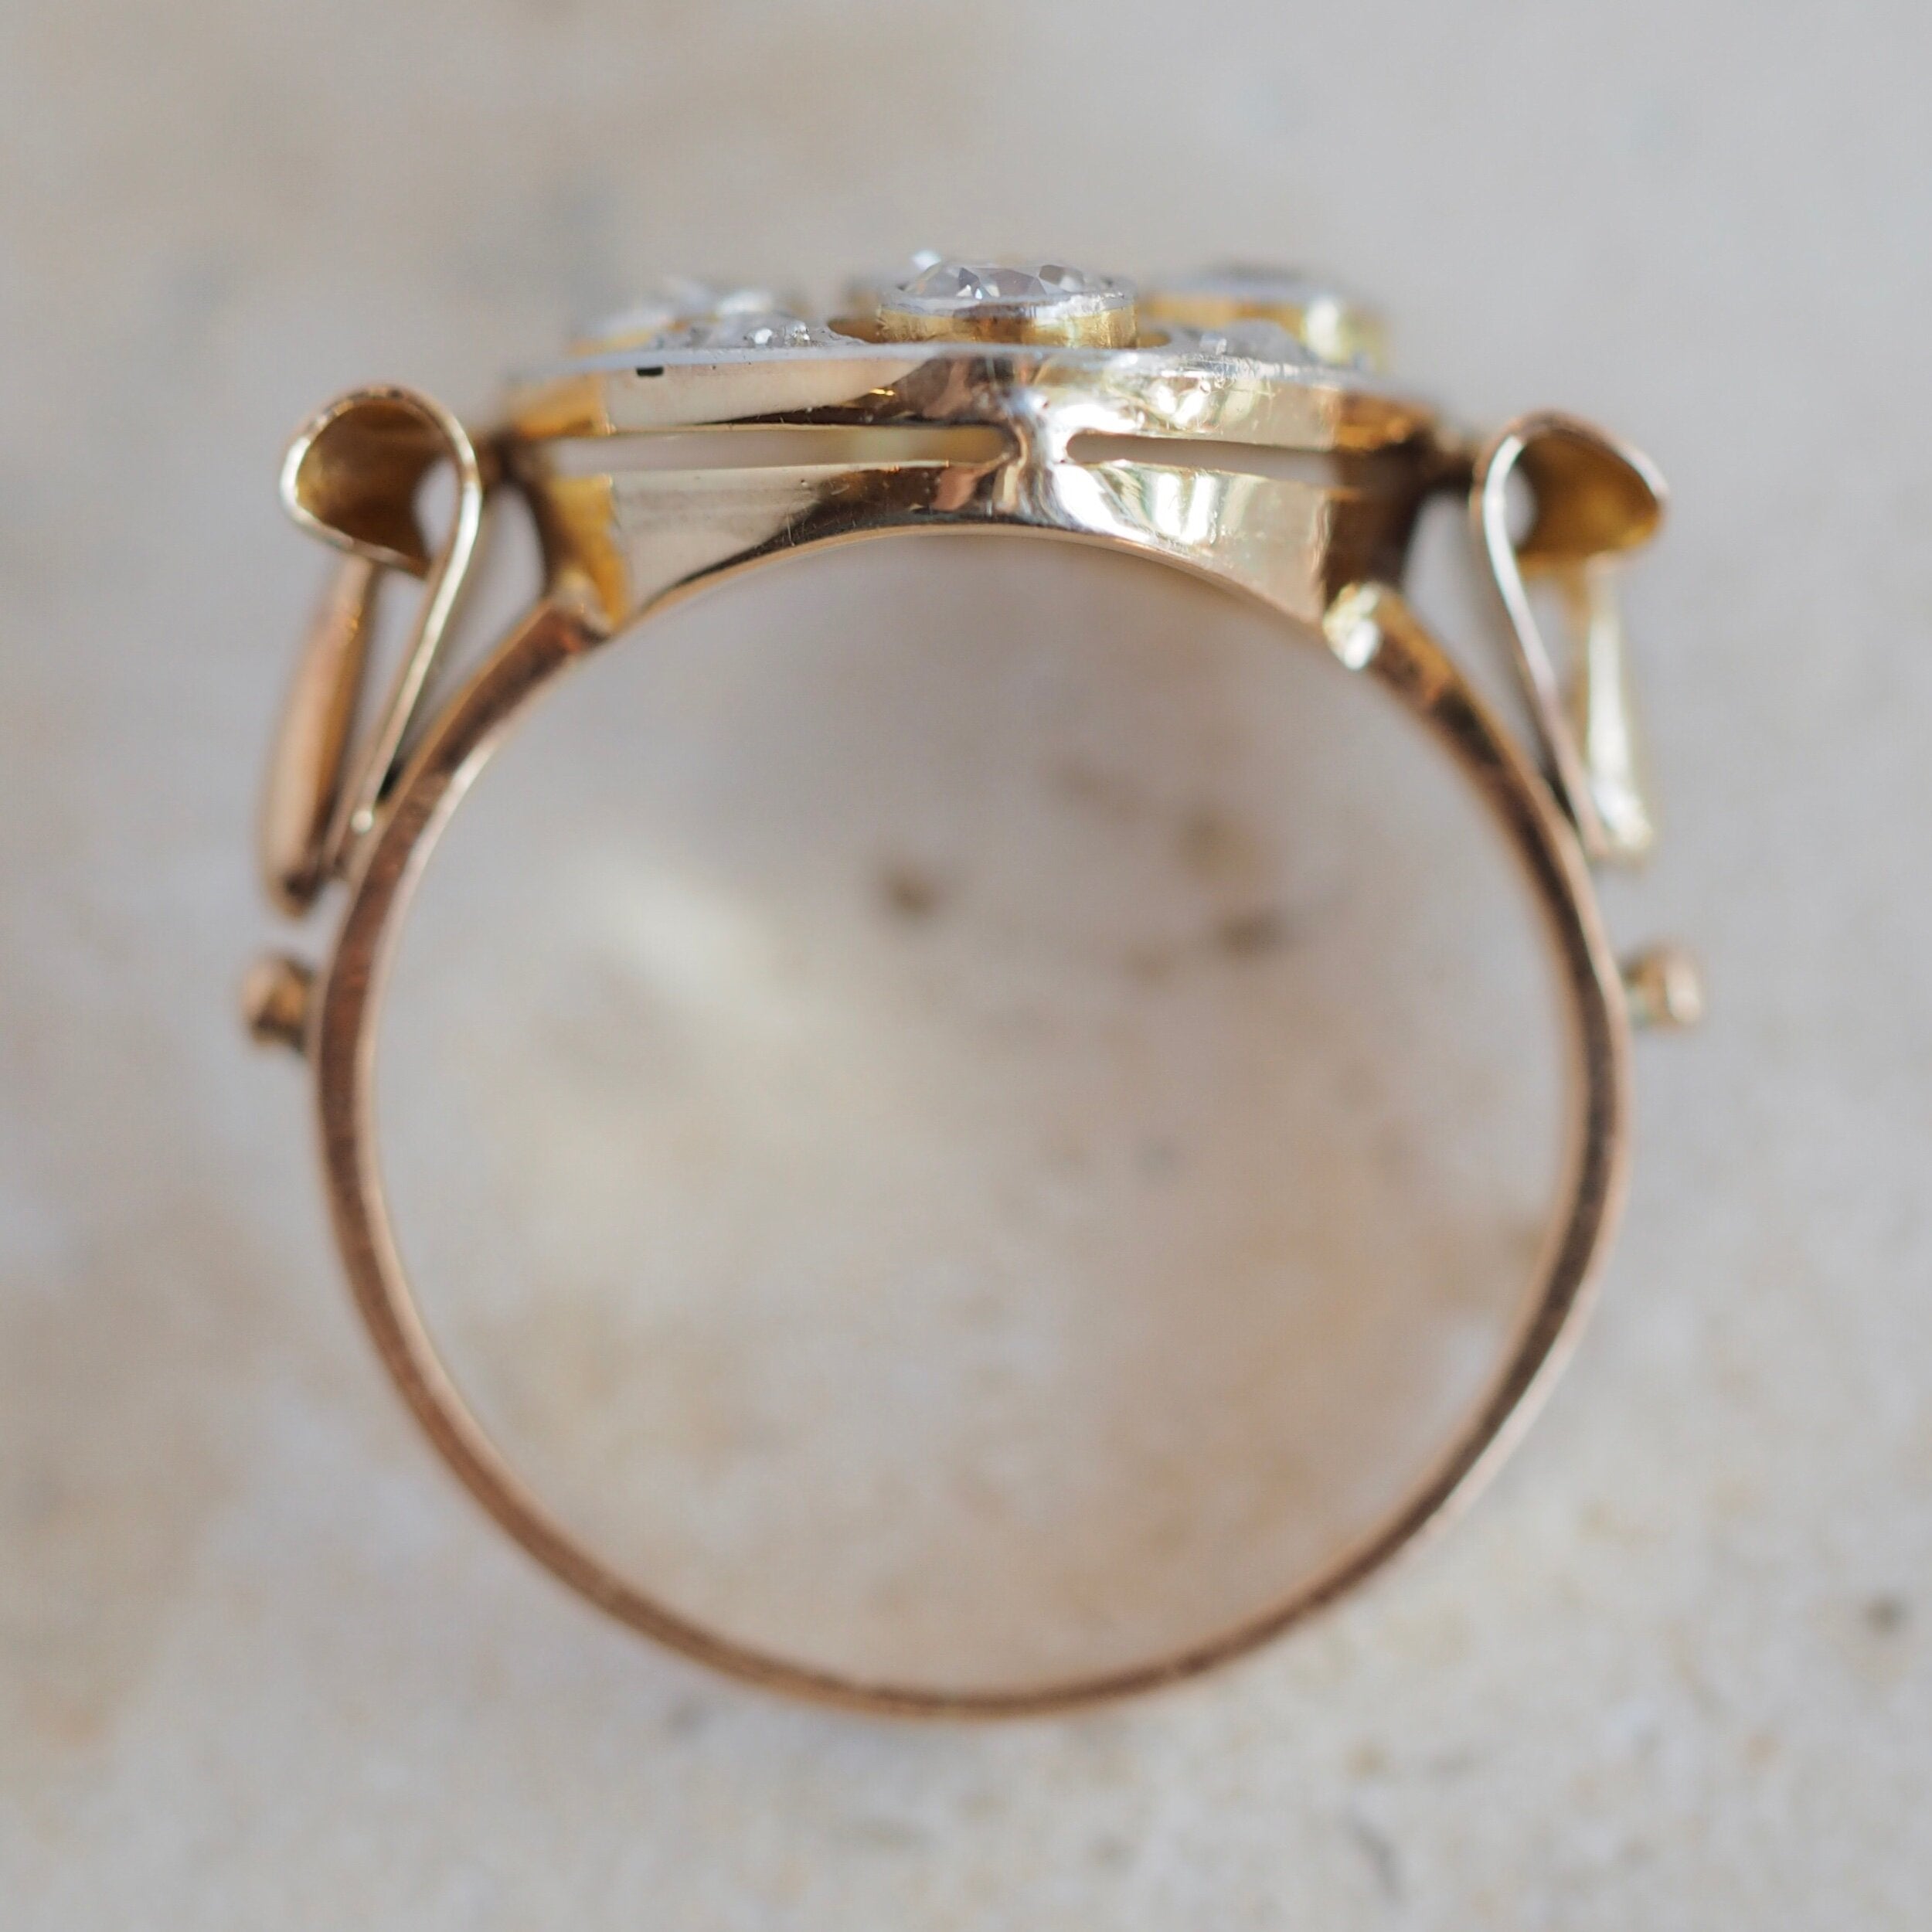 Vintage 18k Gold and Platinum Old European Cut, Old Mine Cut and Rose Cut Diamond Ring